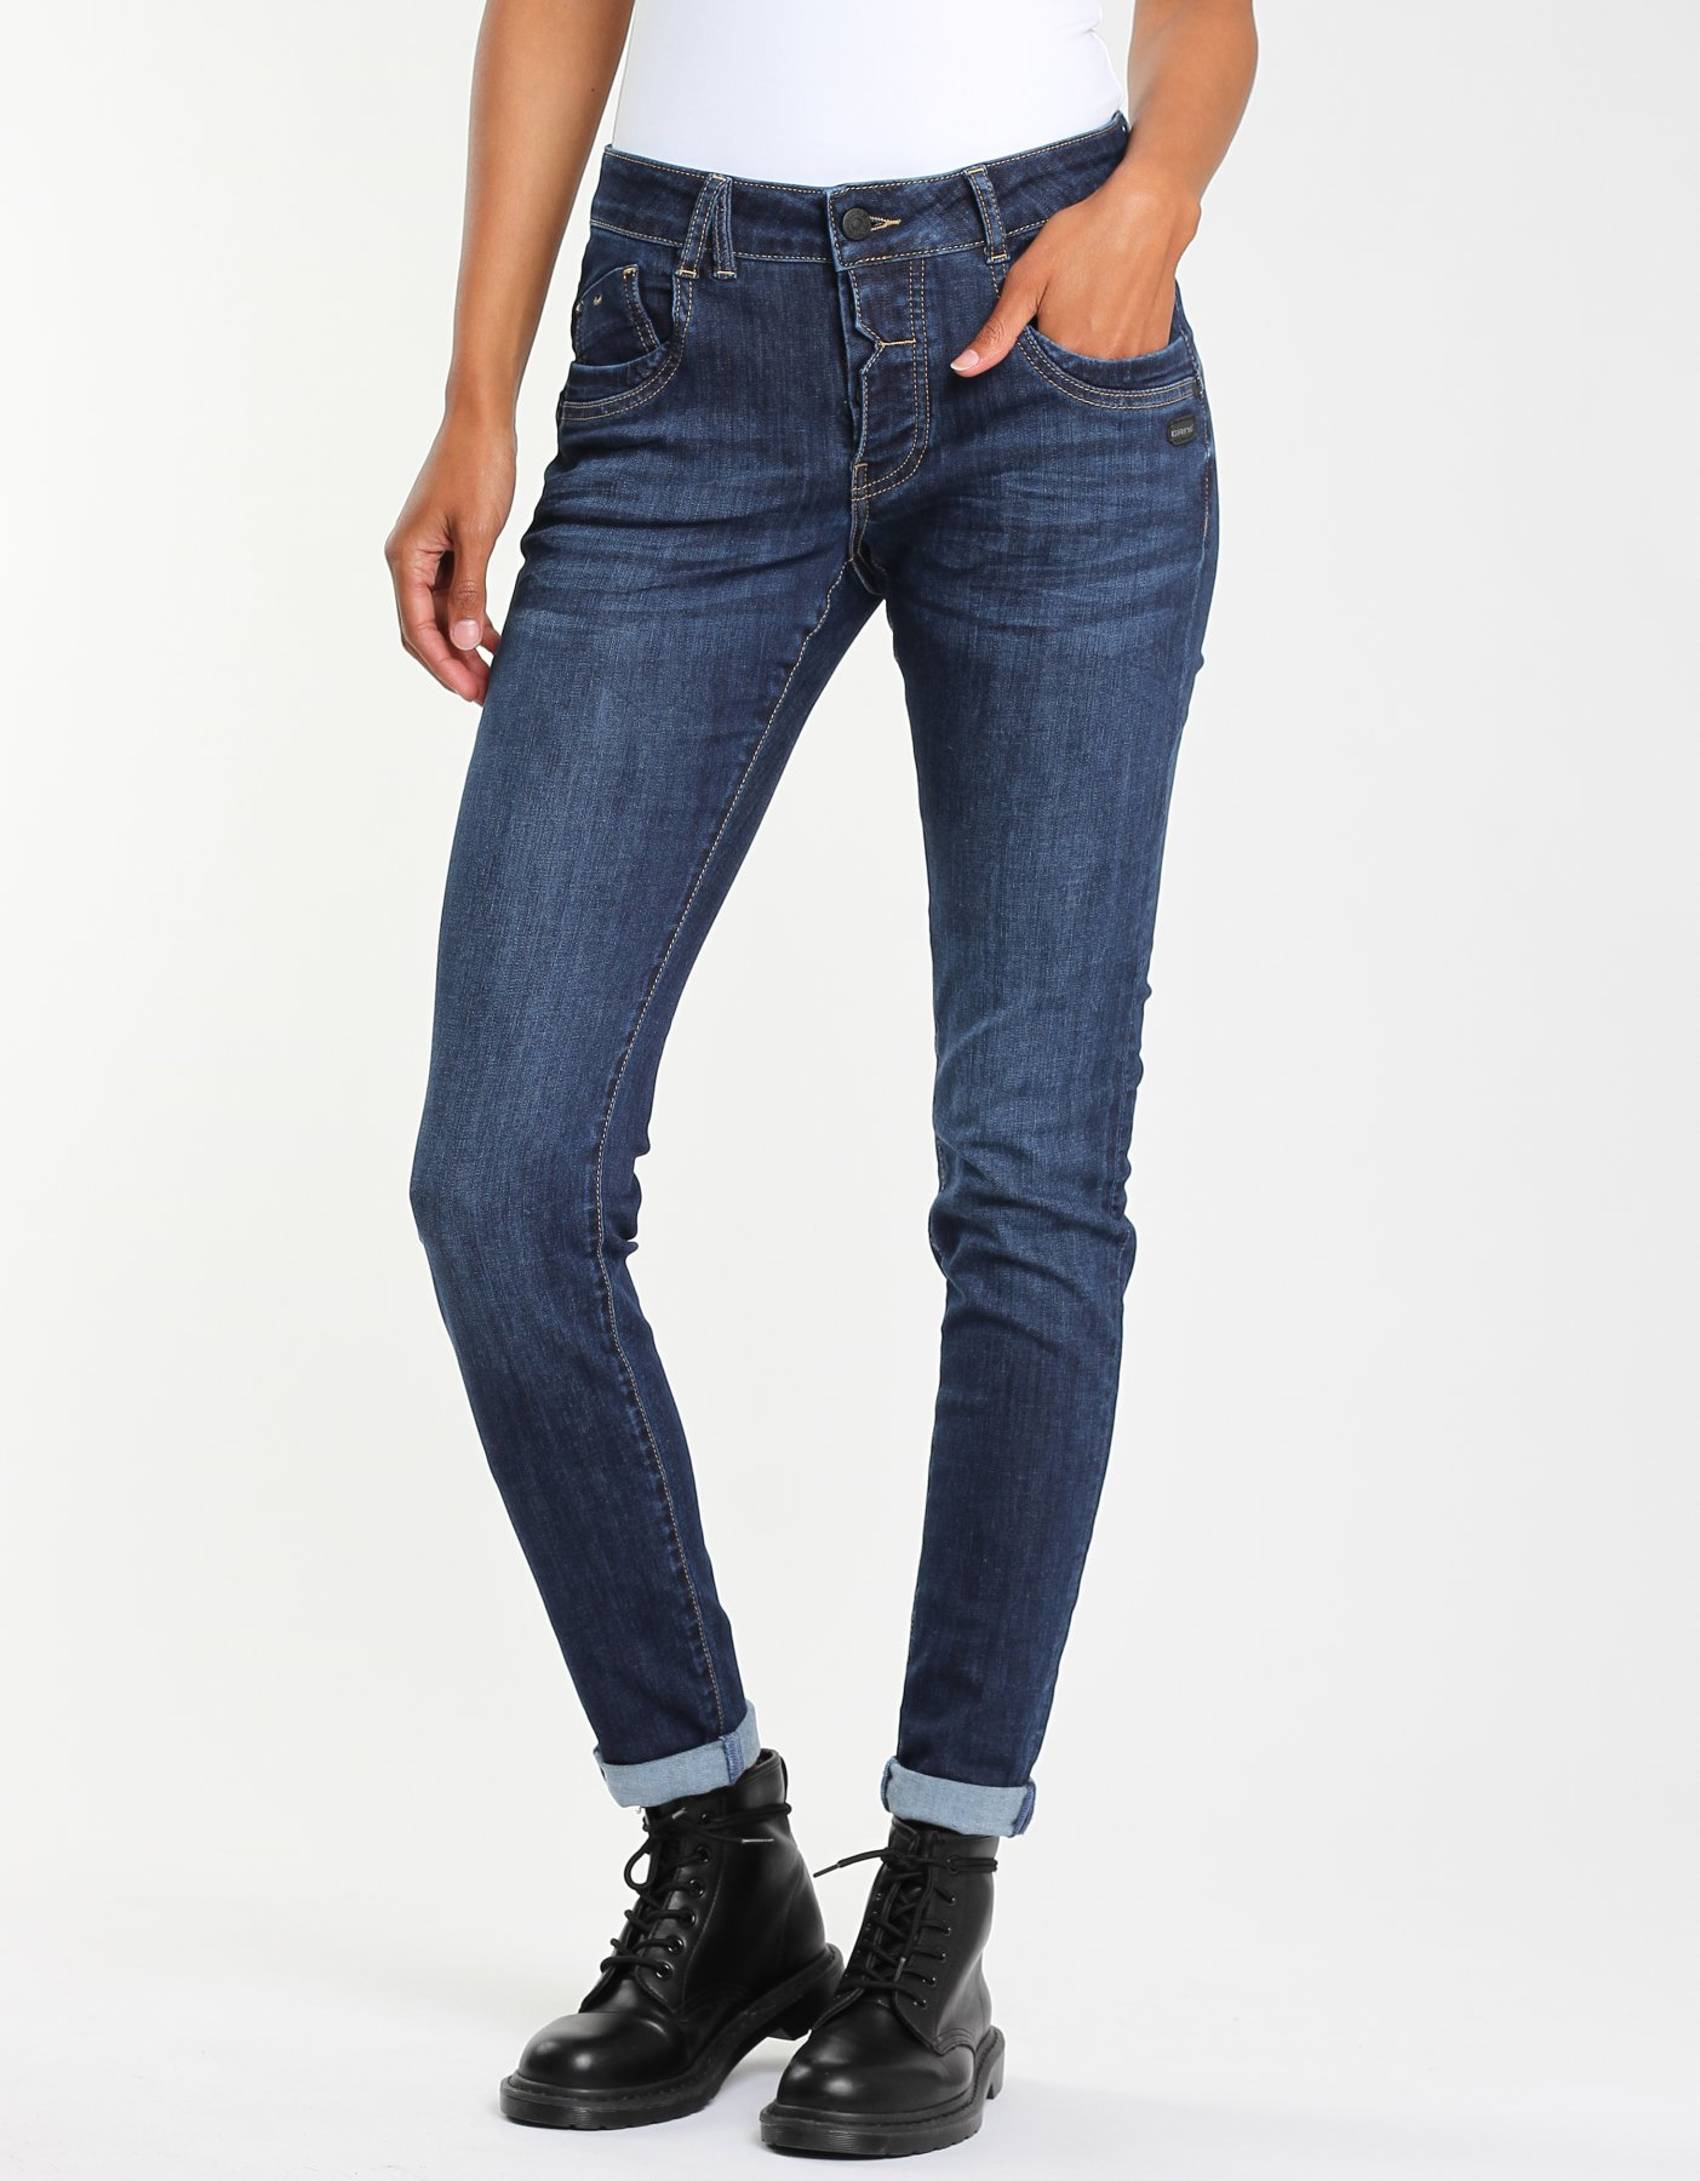 fit | Jeans 94Gerda - GANG relaxed